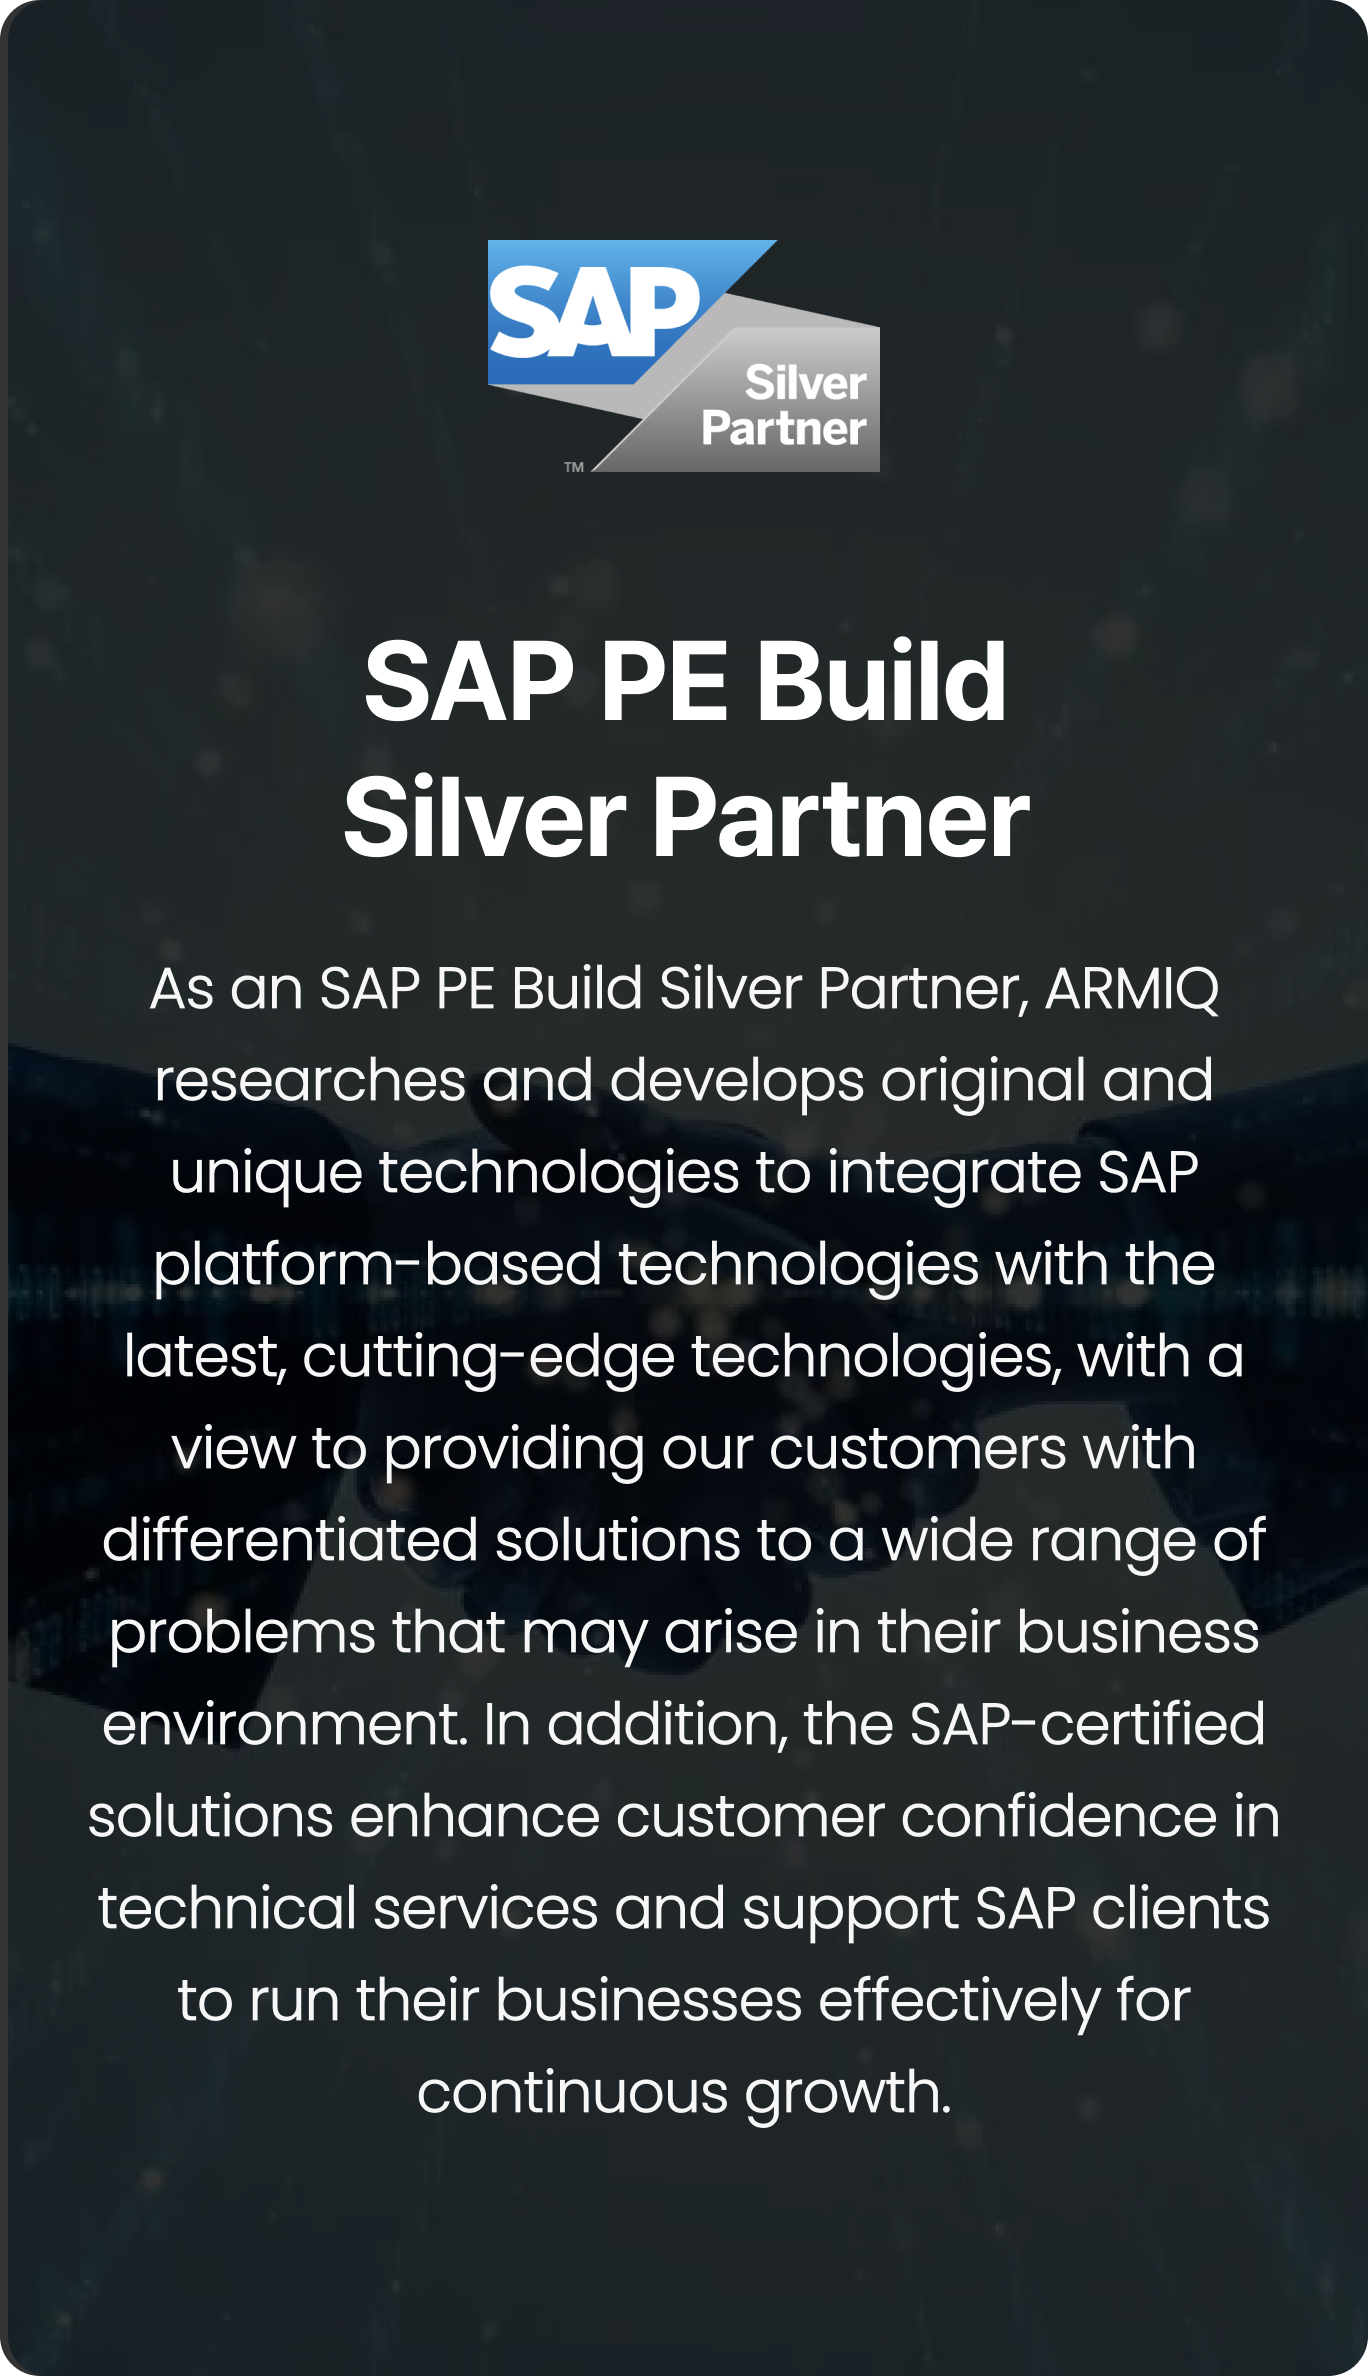 As an SAP PE Build Silver Partner, ARMIQ researches and develops original and unique technologies to integrate SAP platform-based technologies with the latest, cutting-edge technologies, with a view to providing our customers with differentiated solutions to a wide range of problems that may arise in their business environment. In addition, the SAP-certified solutions enhance customer confidence in technical services and support SAP clients to run their businesses effectively for continuous growth.